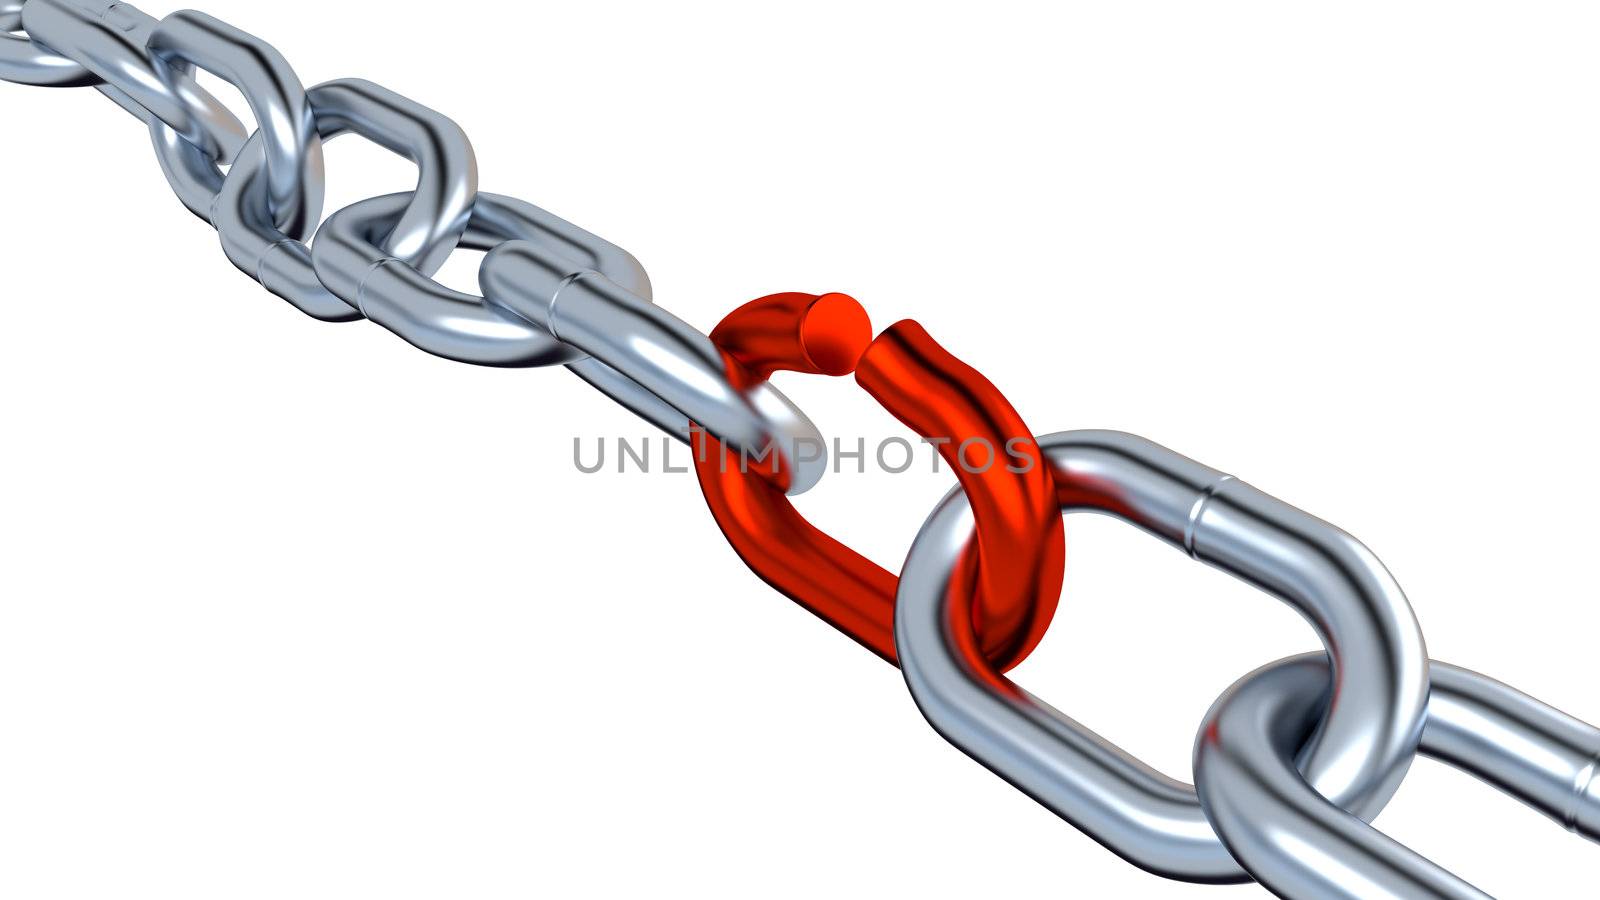 Metallic Chain with One Red Link by shkyo30